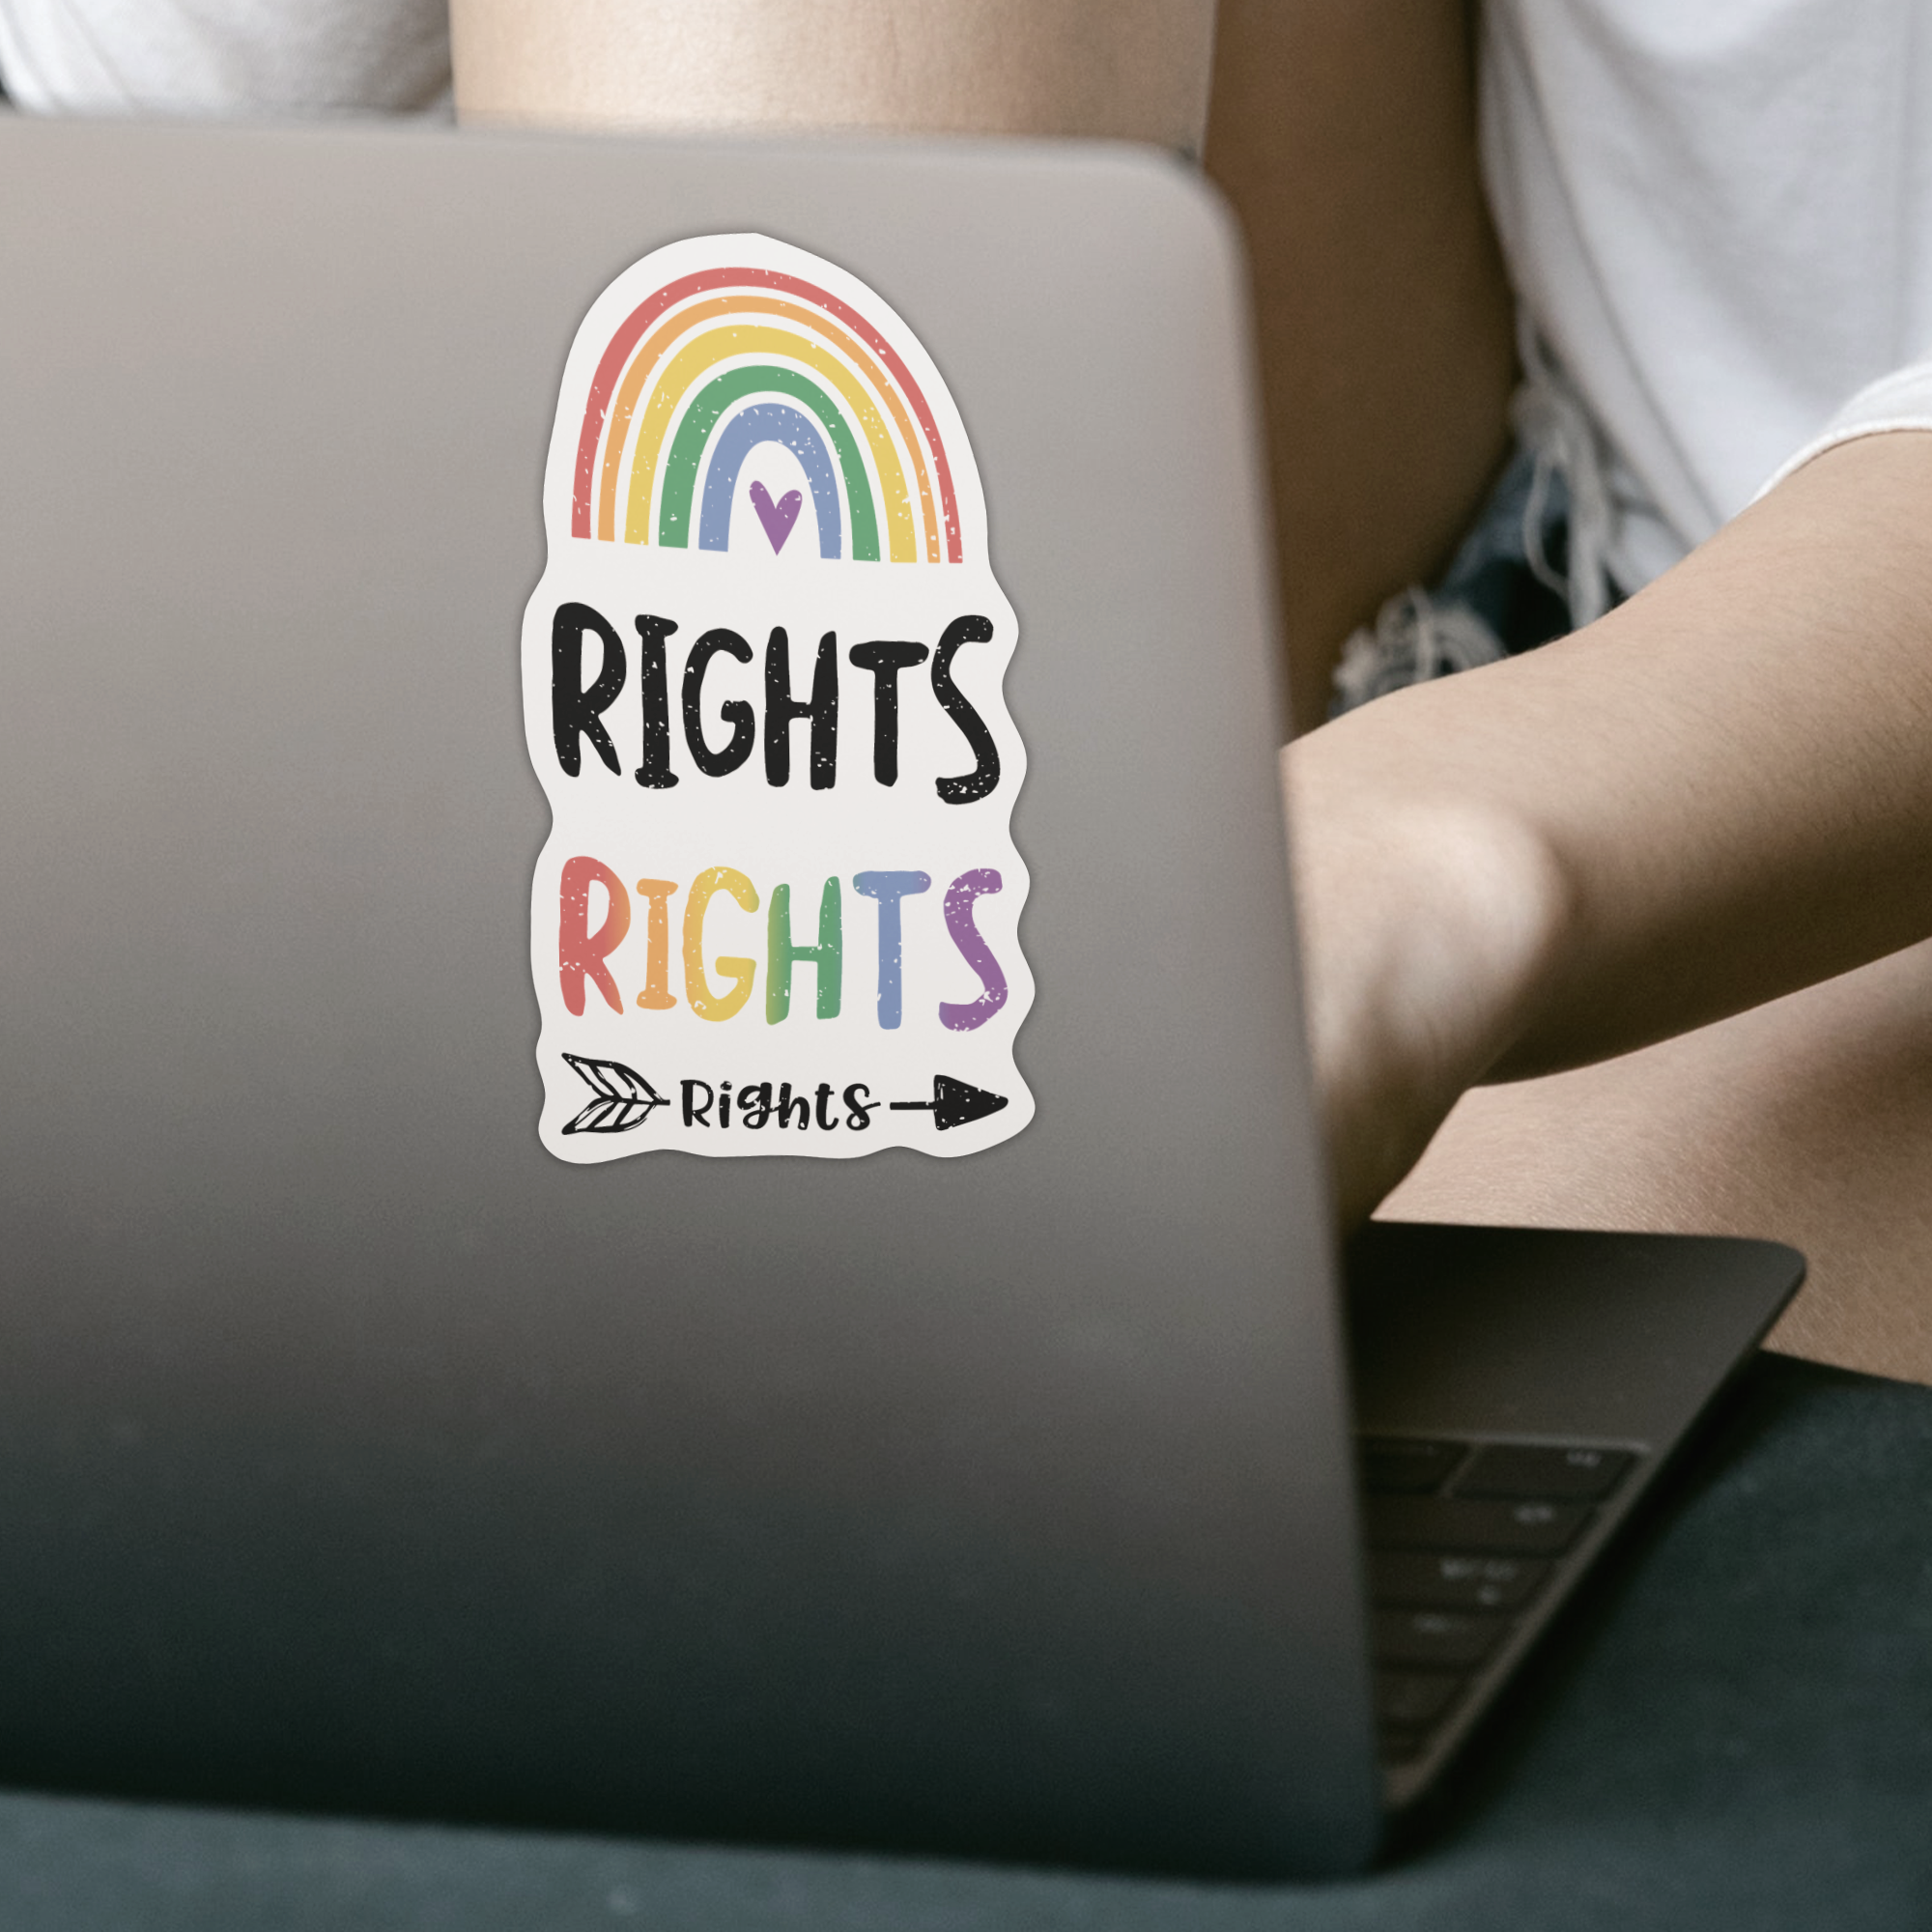 Rights Rights Rights Sticker - DESIGNSBYJNK5.COM